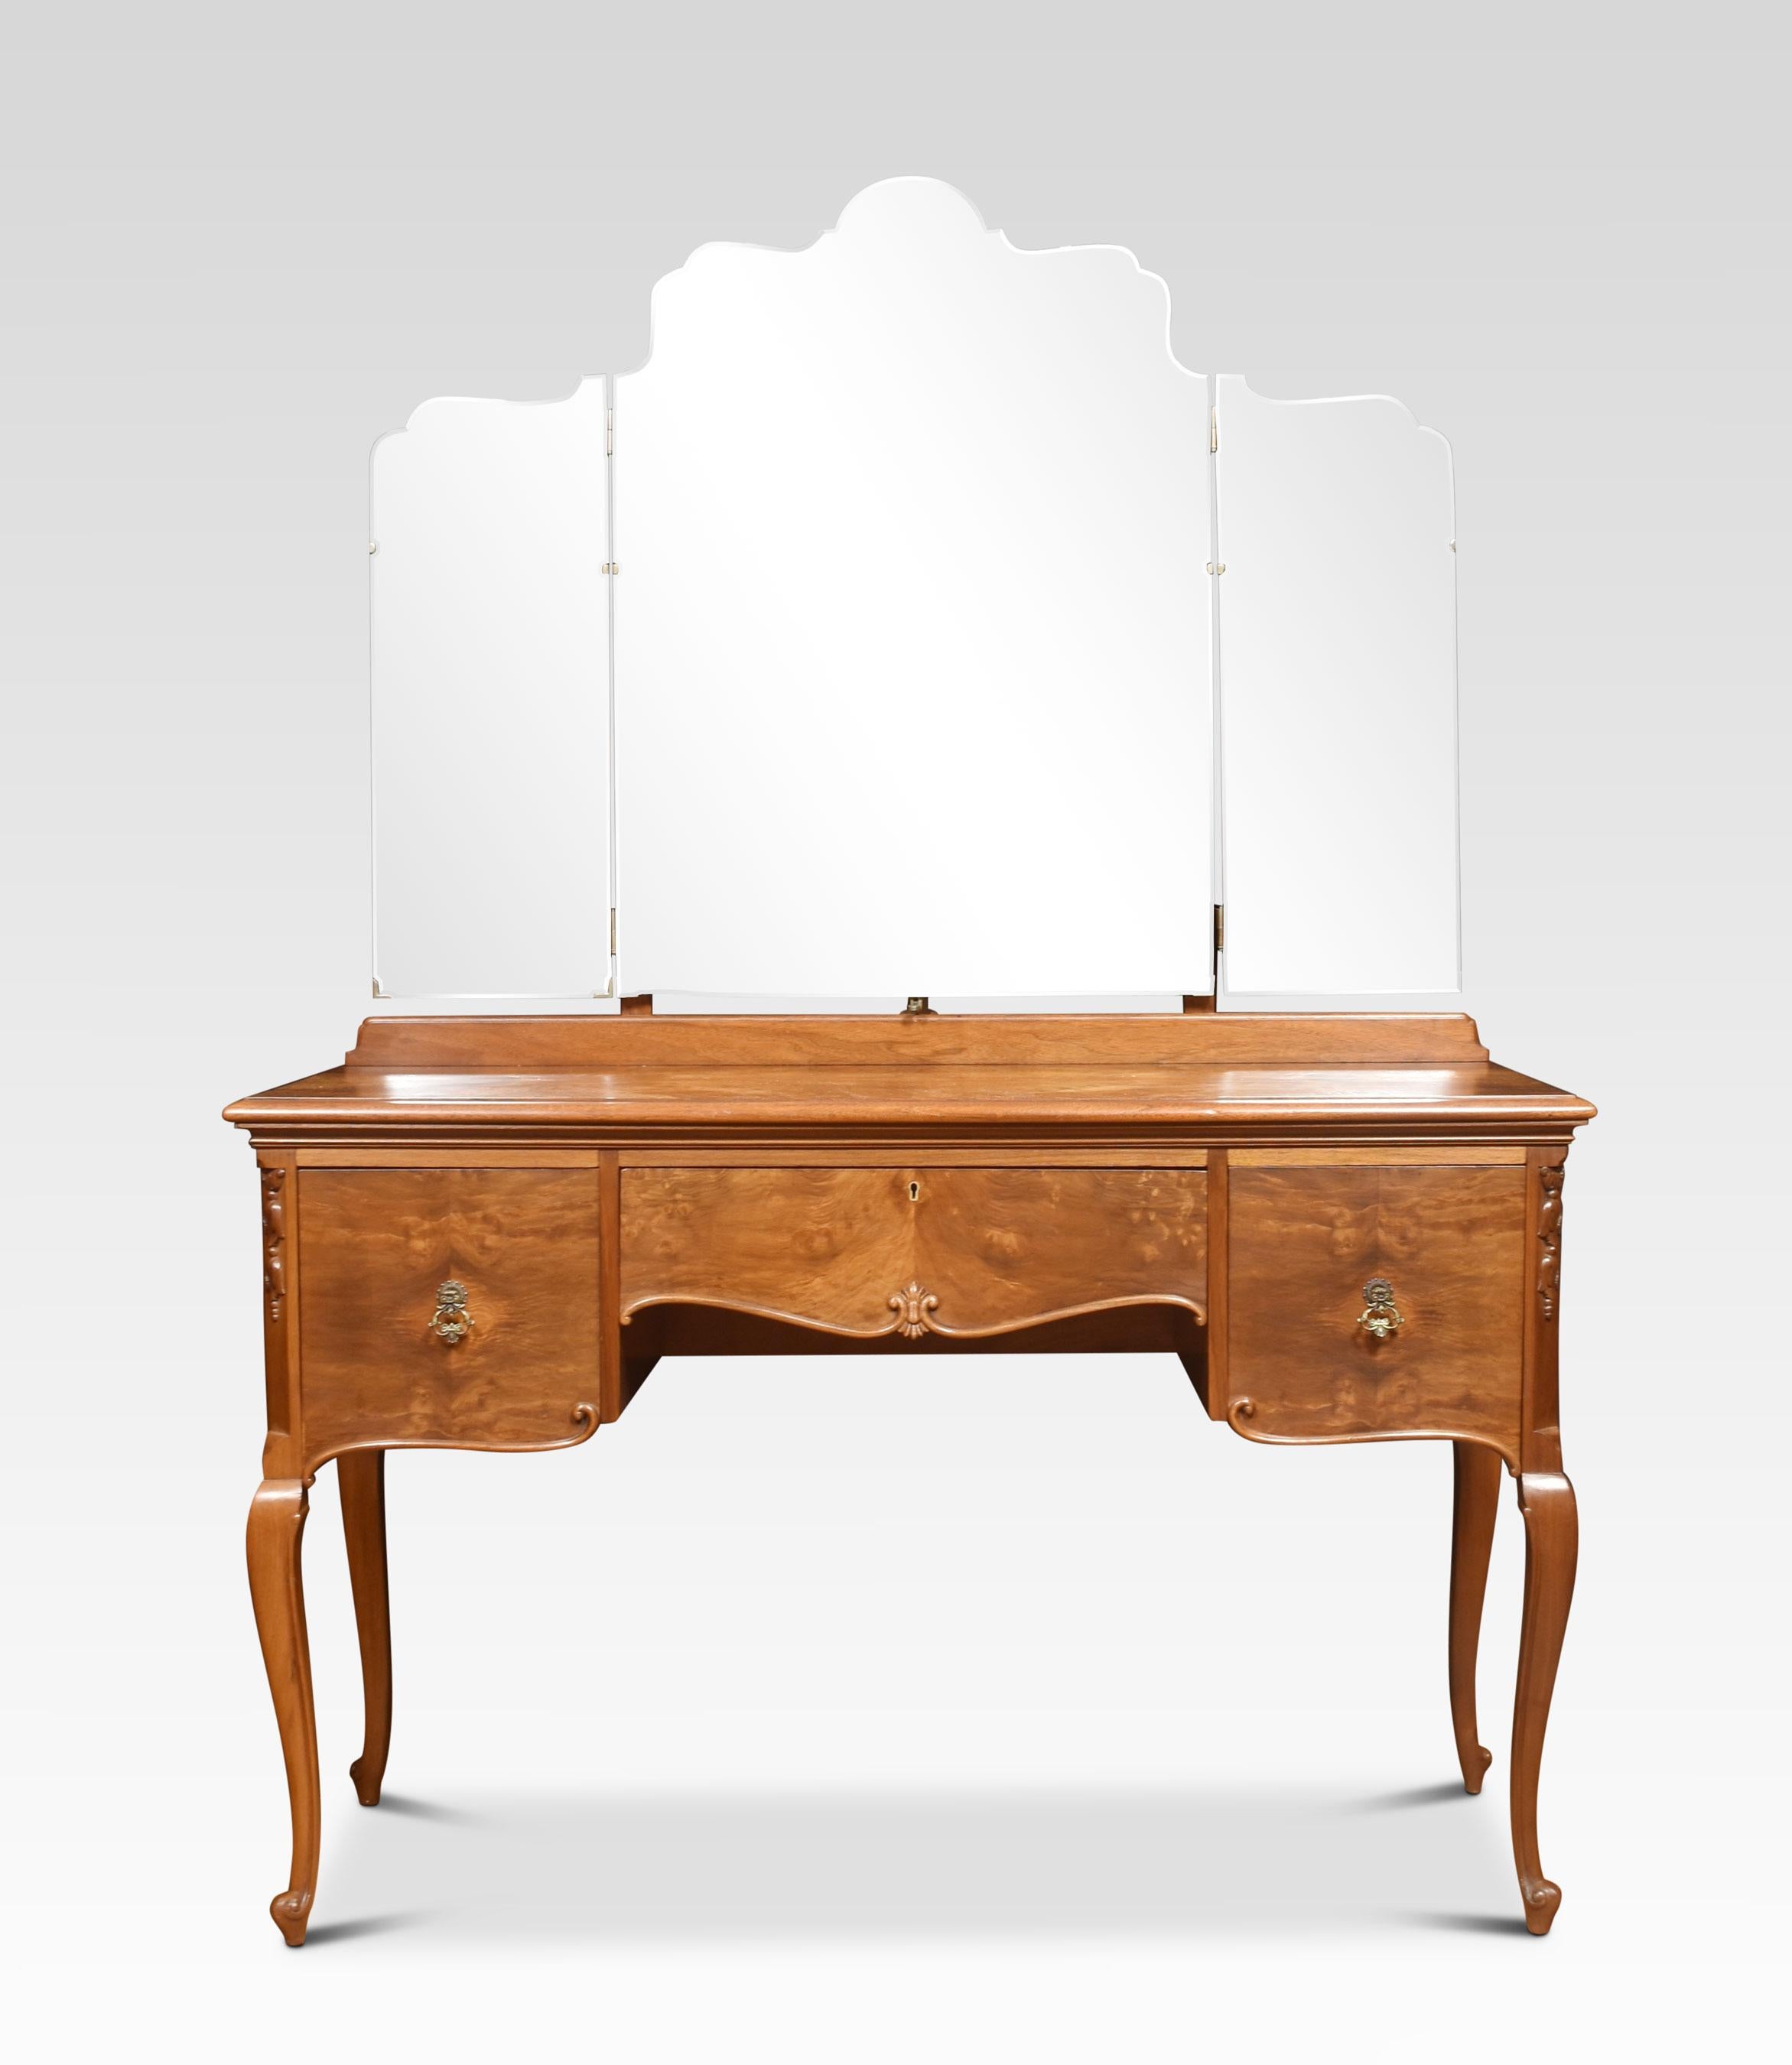 Walnut dressing table, the impressive superstructure consisting of a large central bevelled mirror and smaller mirrors to either side. The rectangular well figured walnut top with moulded edge, over an arrangement of drawers, having brass drop